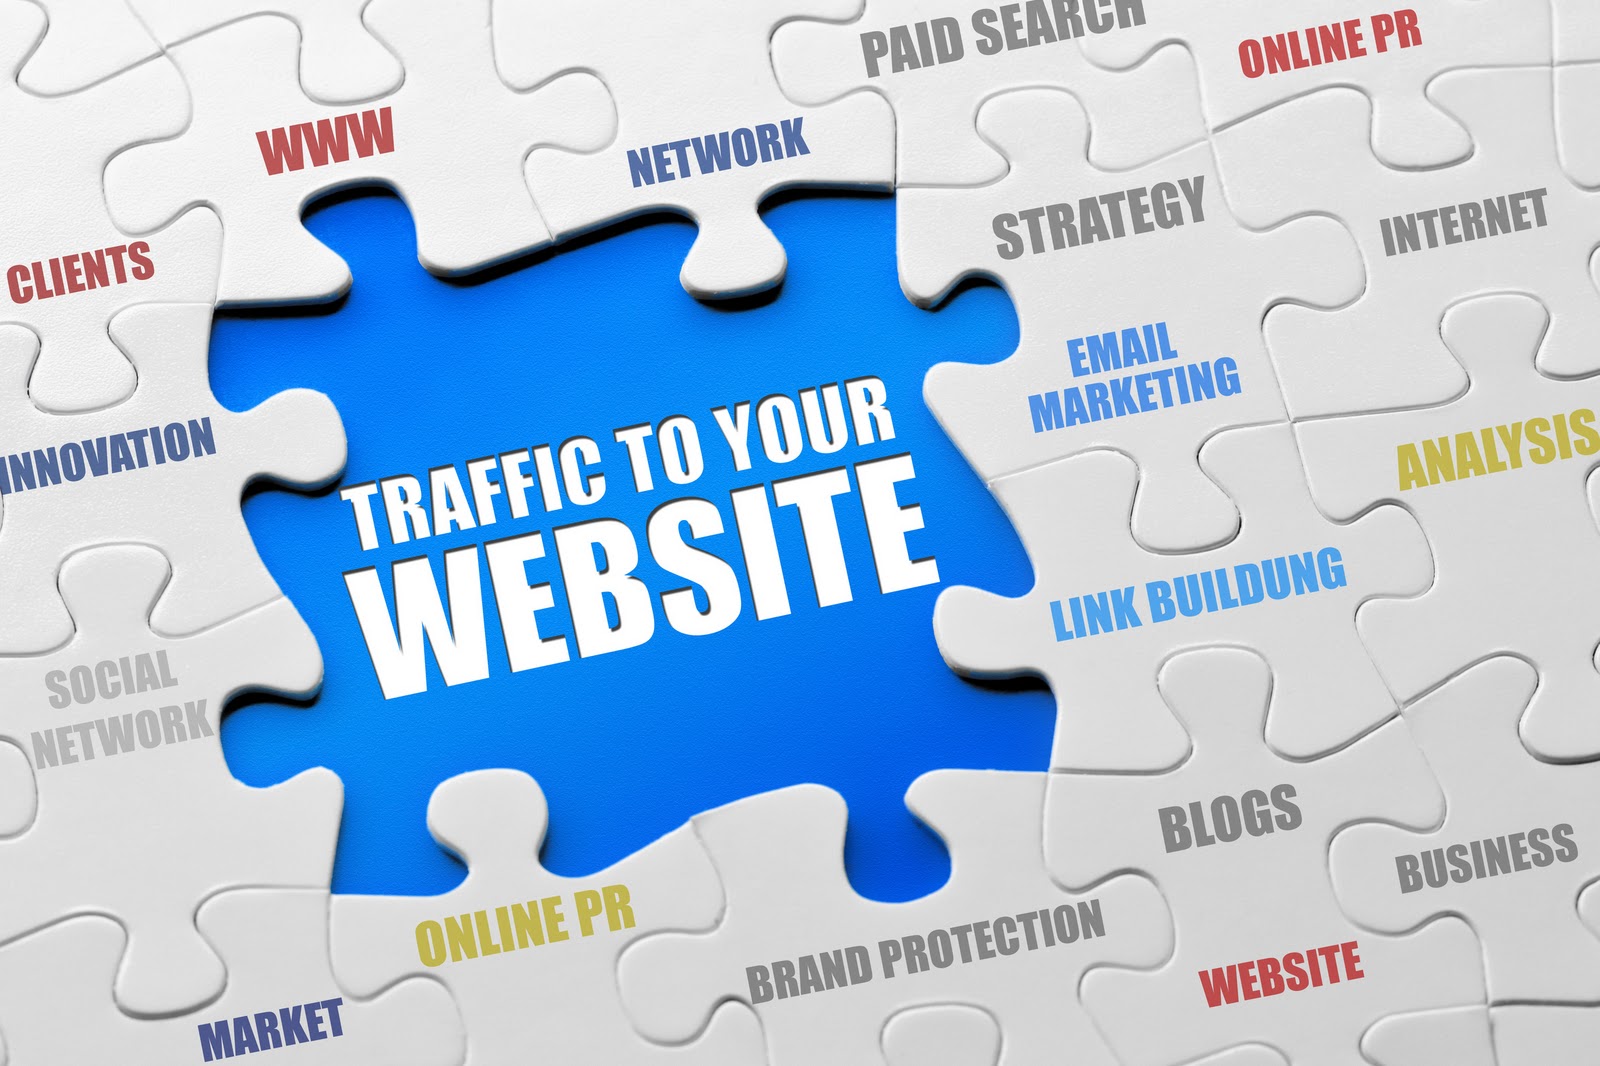 ... UNLIMITED genuine real traffic to your website for one month for $5